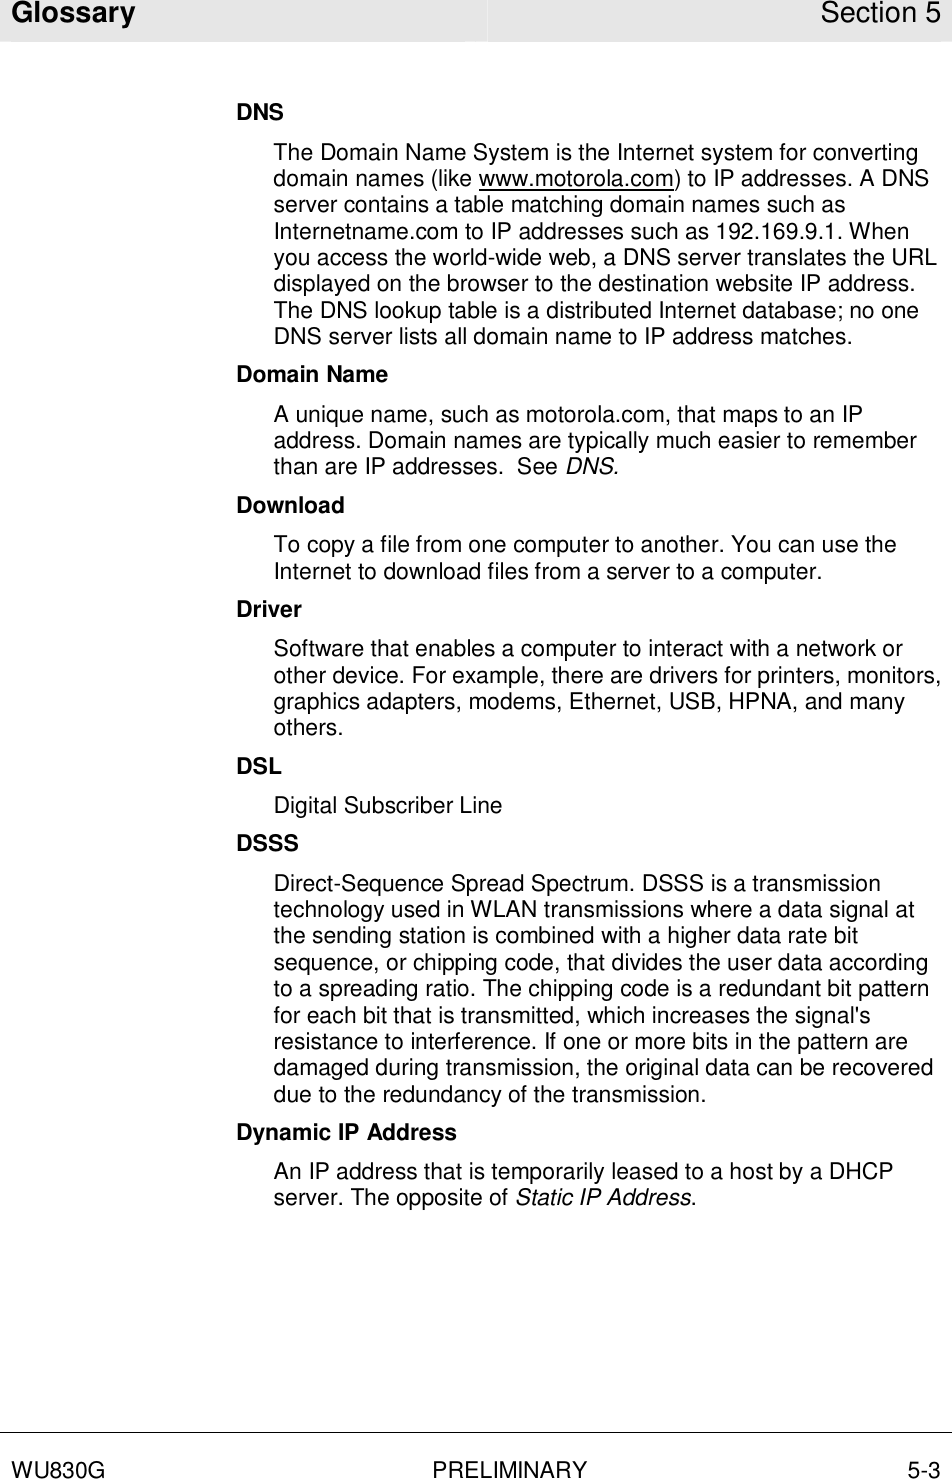 Glossary Section 5  WU830G PRELIMINARY 5-3  DNS The Domain Name System is the Internet system for converting domain names (like www.motorola.com) to IP addresses. A DNS server contains a table matching domain names such as Internetname.com to IP addresses such as 192.169.9.1. When you access the world-wide web, a DNS server translates the URL displayed on the browser to the destination website IP address. The DNS lookup table is a distributed Internet database; no one DNS server lists all domain name to IP address matches. Domain Name A unique name, such as motorola.com, that maps to an IP address. Domain names are typically much easier to remember than are IP addresses.  See DNS. Download To copy a file from one computer to another. You can use the Internet to download files from a server to a computer.  Driver Software that enables a computer to interact with a network or other device. For example, there are drivers for printers, monitors, graphics adapters, modems, Ethernet, USB, HPNA, and many others. DSL Digital Subscriber Line DSSS Direct-Sequence Spread Spectrum. DSSS is a transmission technology used in WLAN transmissions where a data signal at the sending station is combined with a higher data rate bit sequence, or chipping code, that divides the user data according to a spreading ratio. The chipping code is a redundant bit pattern for each bit that is transmitted, which increases the signal&apos;s resistance to interference. If one or more bits in the pattern are damaged during transmission, the original data can be recovered due to the redundancy of the transmission.  Dynamic IP Address An IP address that is temporarily leased to a host by a DHCP server. The opposite of Static IP Address. 